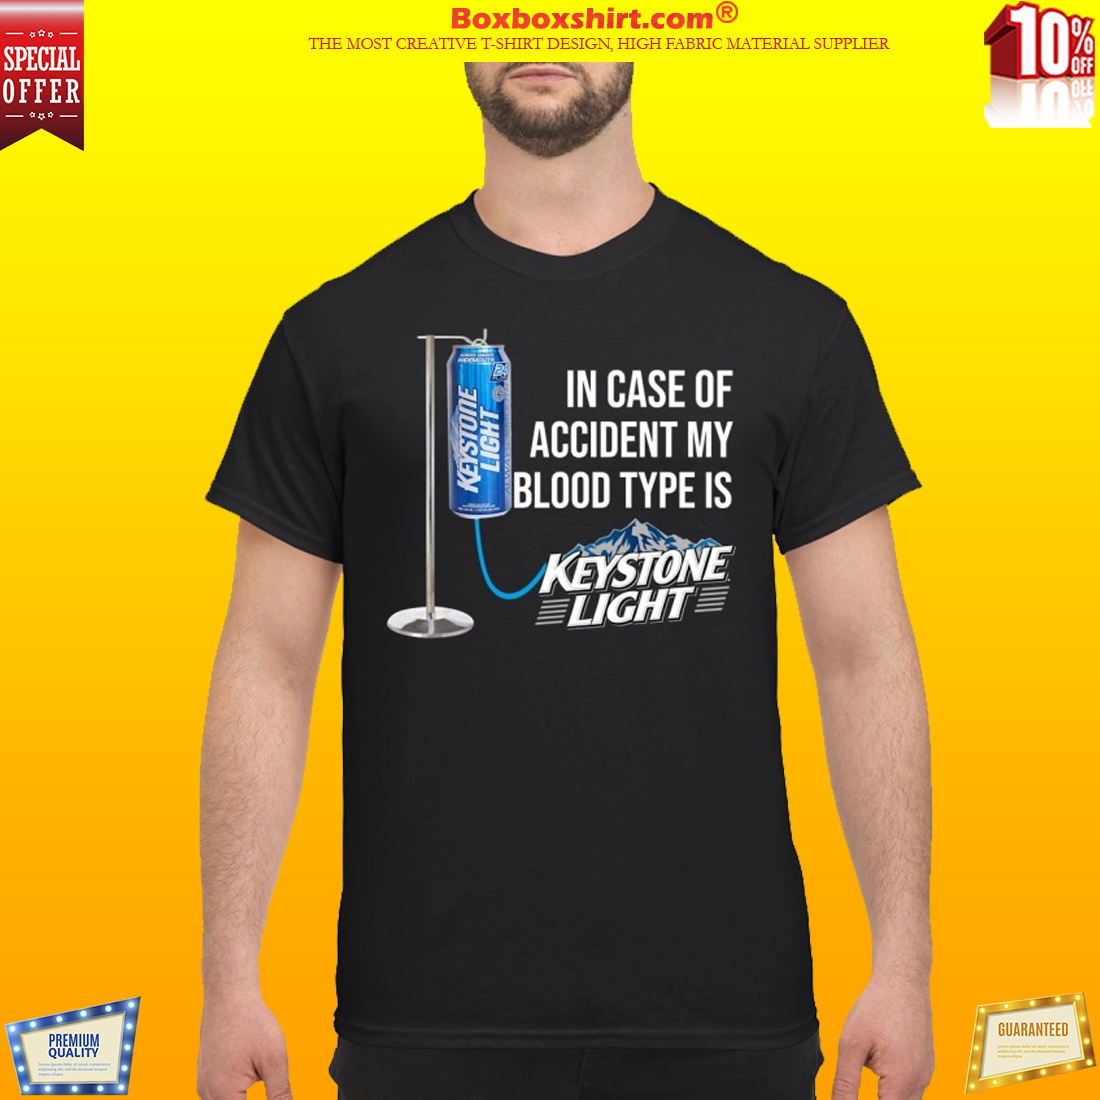 In case of accident my blood type is Keystone Light shirt